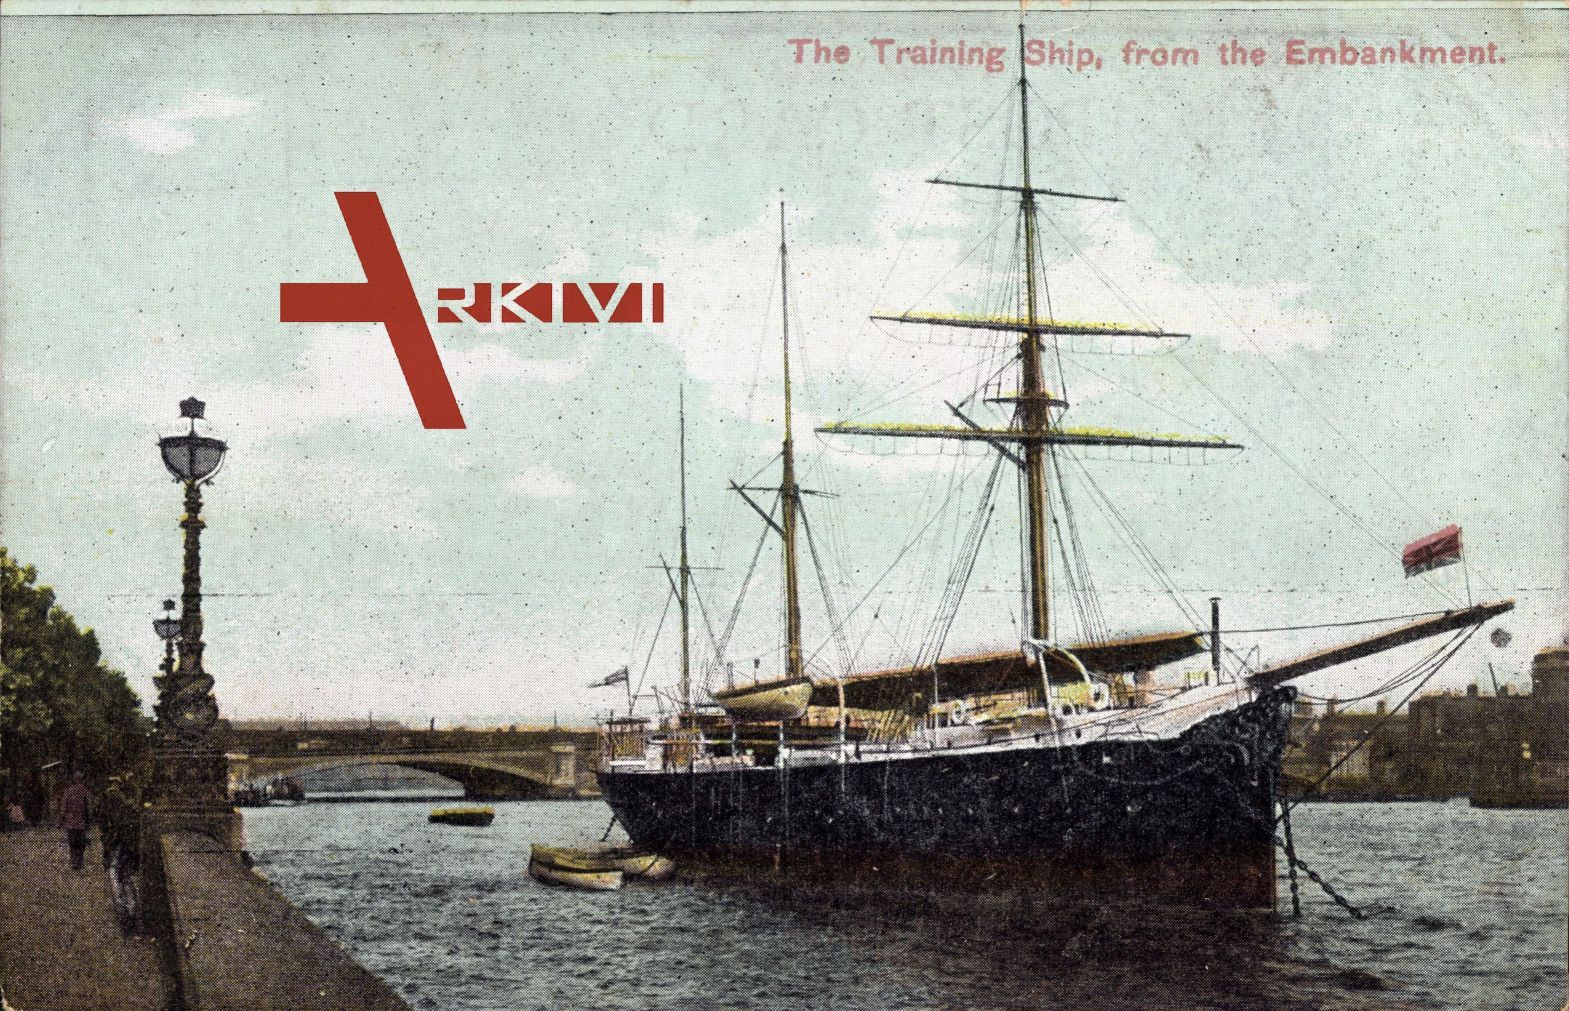 The Training Ship, from the Embankment, Segelschulschiff